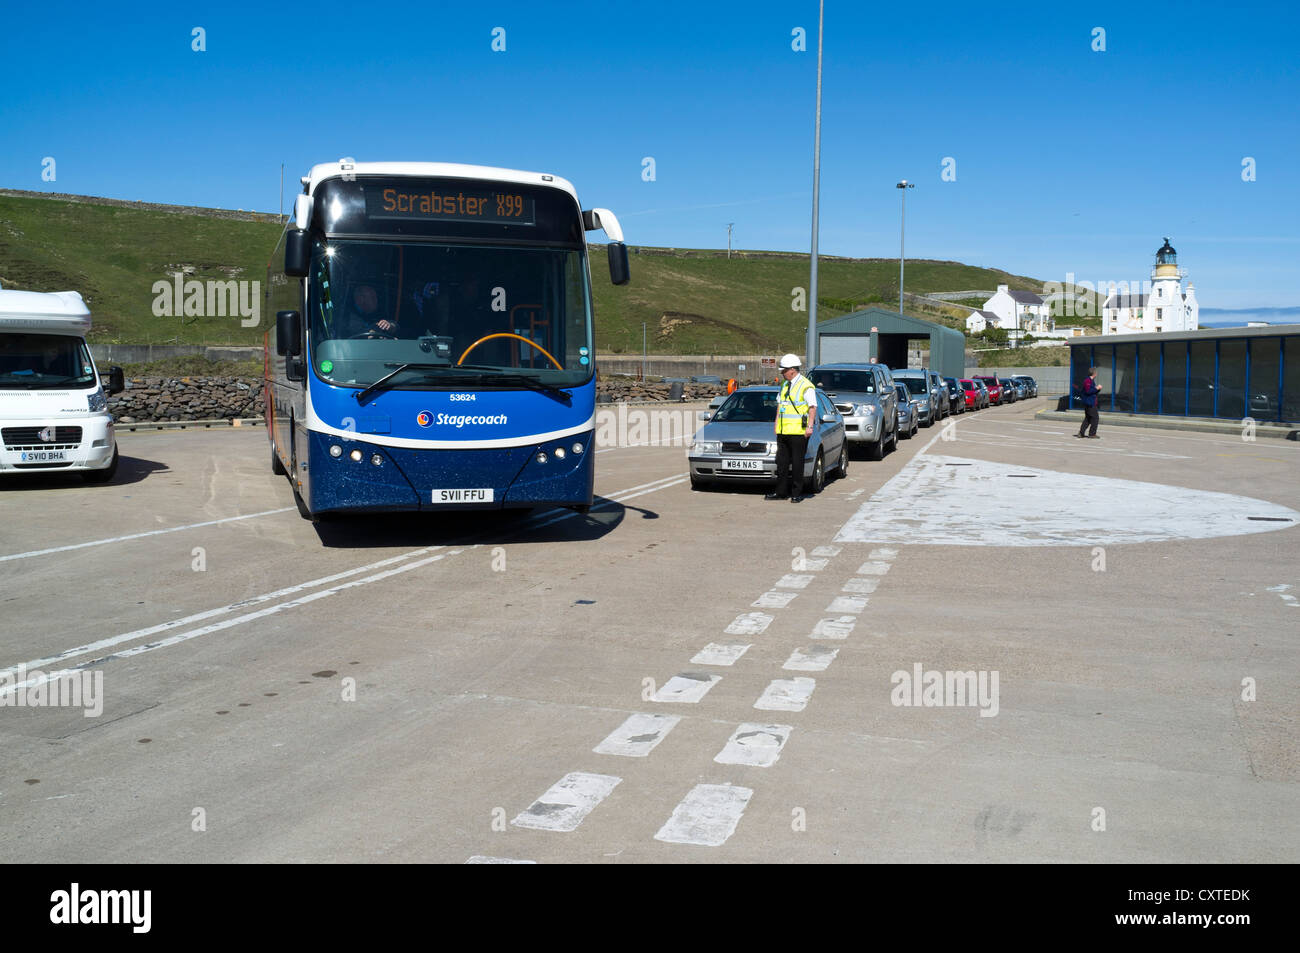 dh  SCRABSTER CAITHNESS Stagecoach bus arriving Scrabster pier for Northlink ferry transport buses scotland Stock Photo